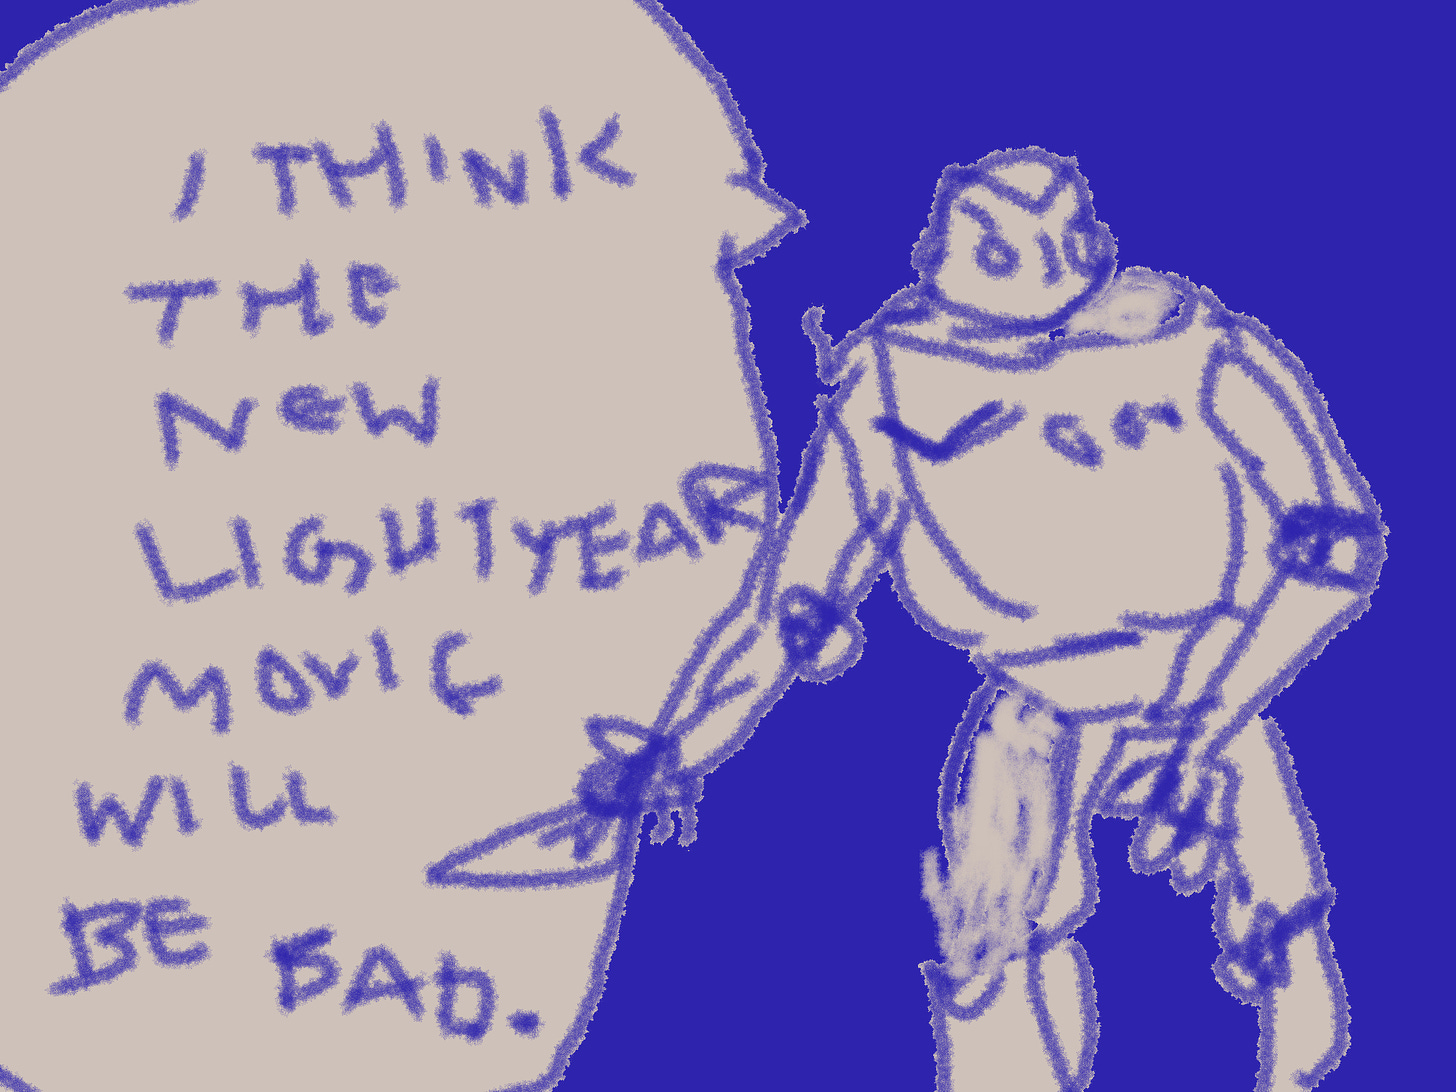 badly drawn image of buzz lightyear saying, i think the new lightyear movie will be bad